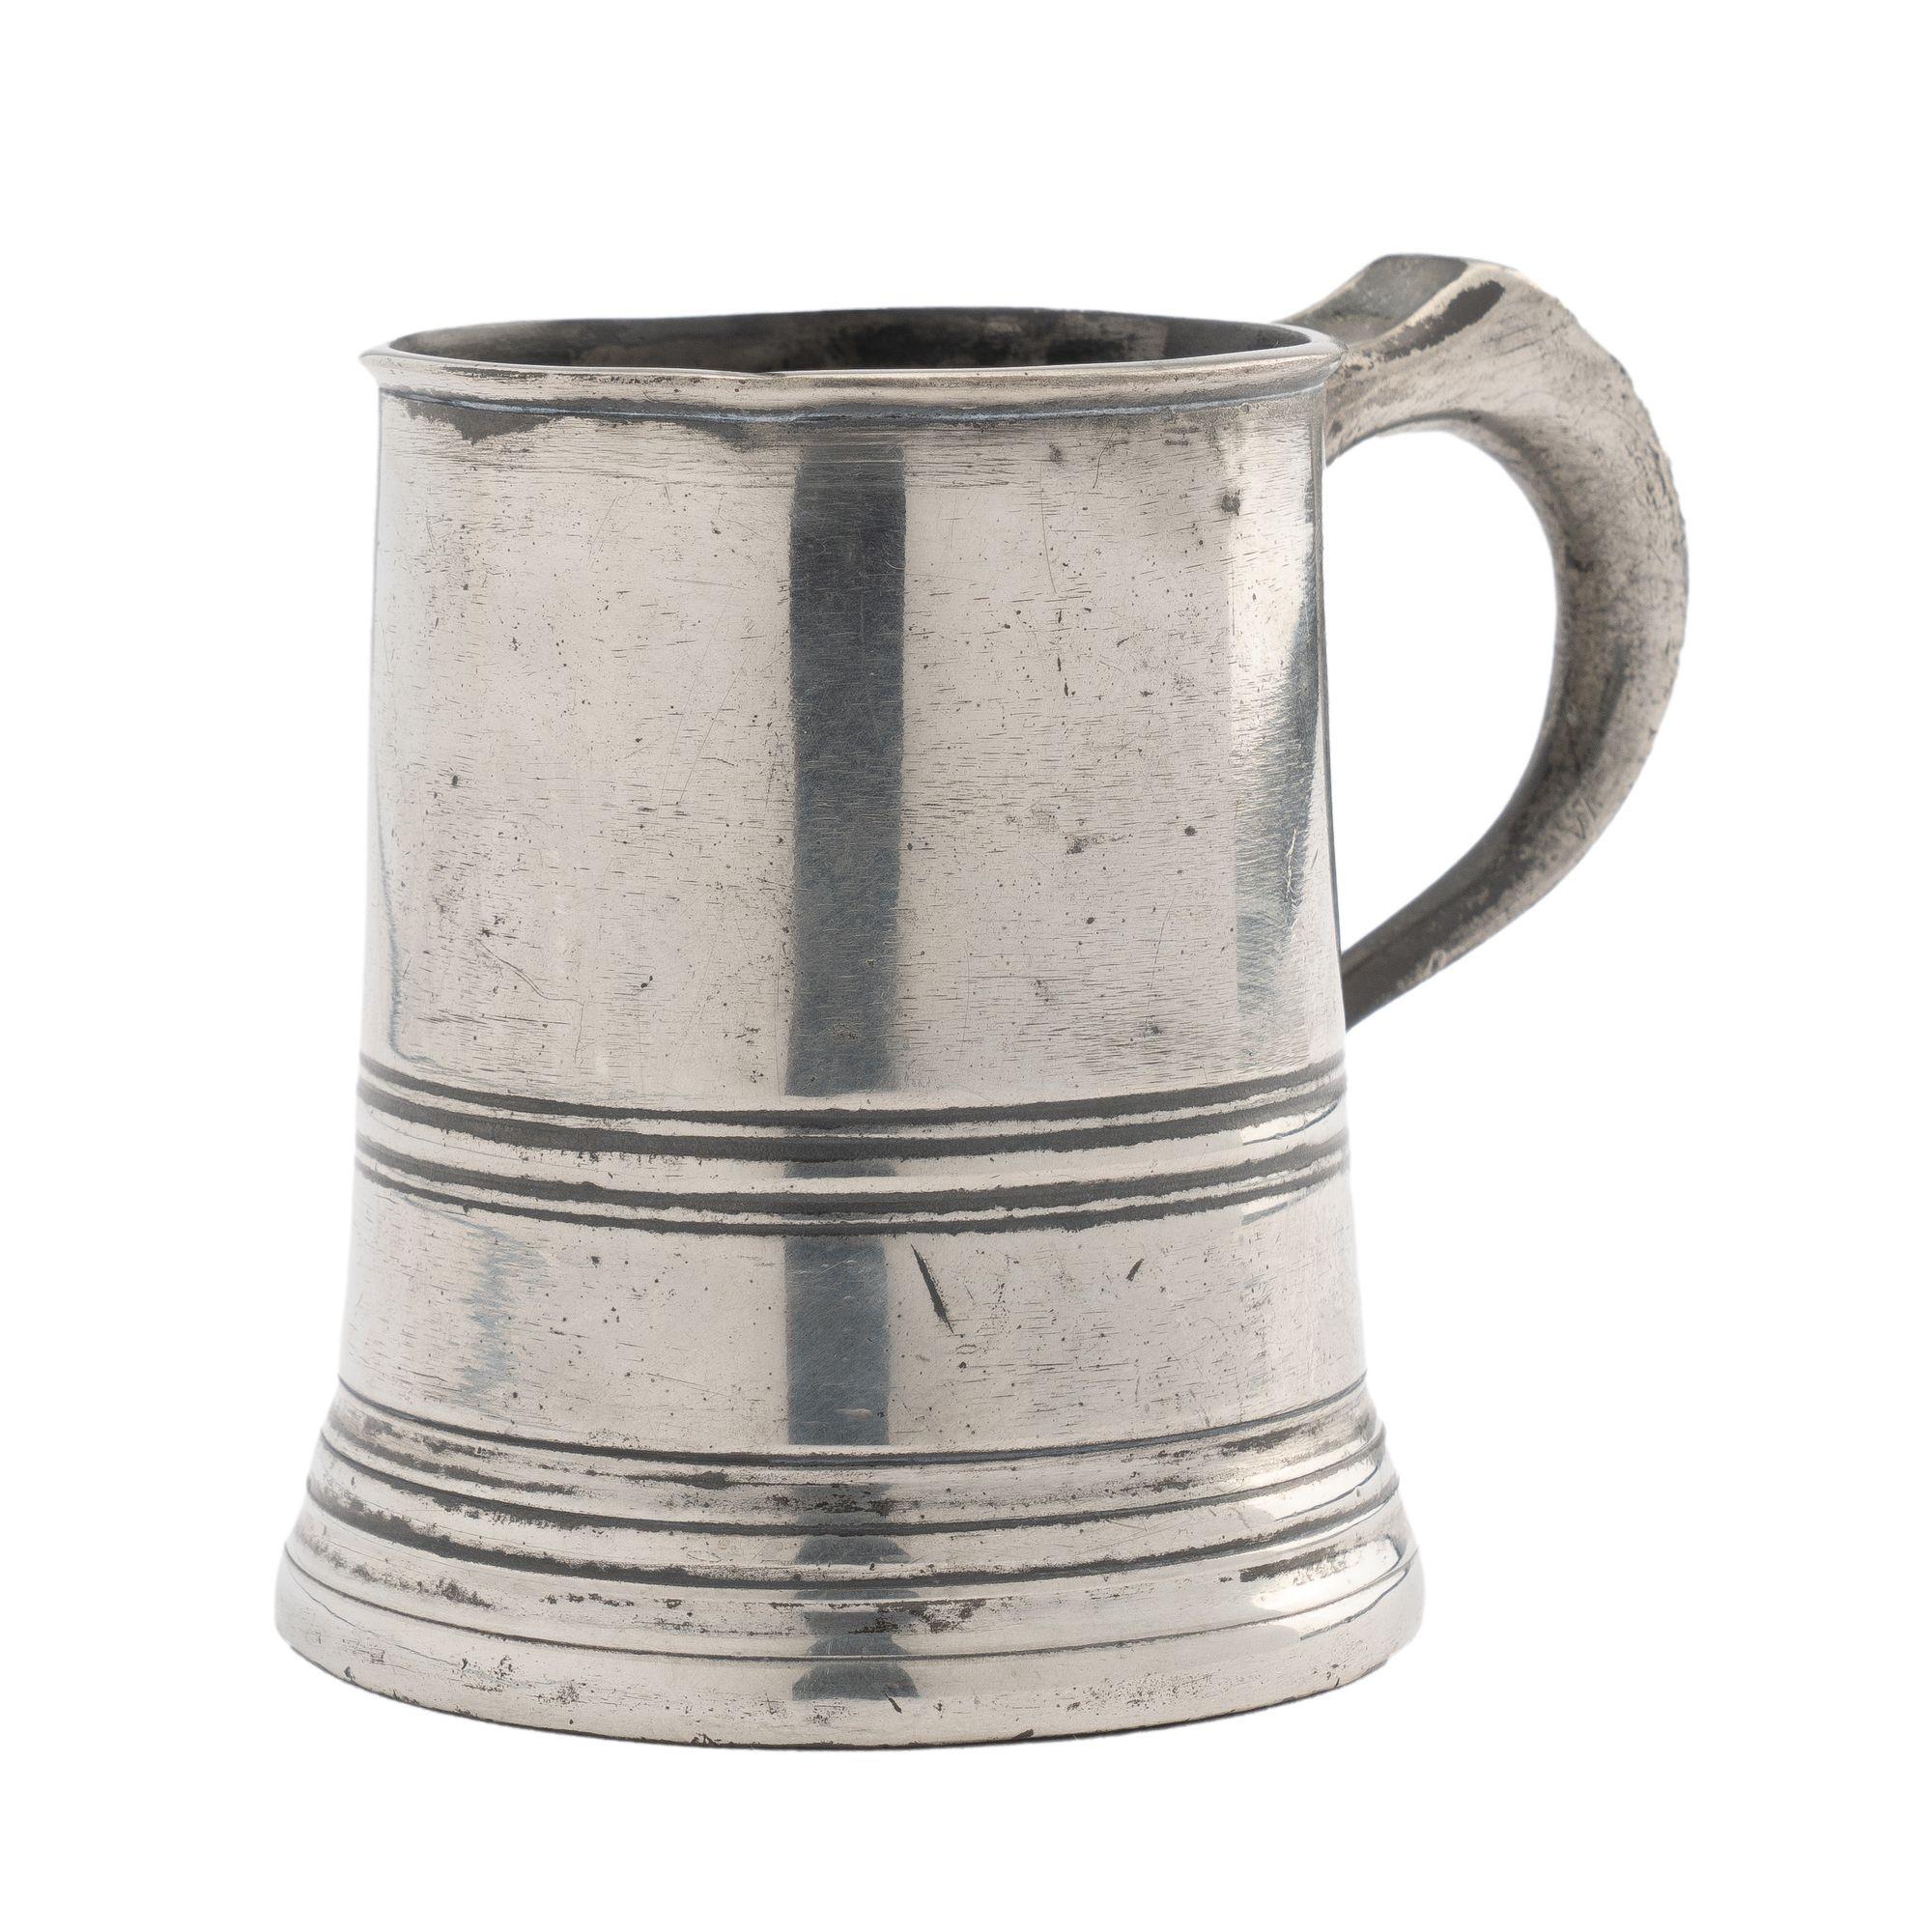 Half pint pewter mug by Yates & Birch. The tapered mug has a beaded lip, inscribed beading at the middle and base of the mug, and an applied handle. Stamped on the underside of the lip: Yates & Birch, 1/2 (Pint)

Birmingham, England, 1839-1860.